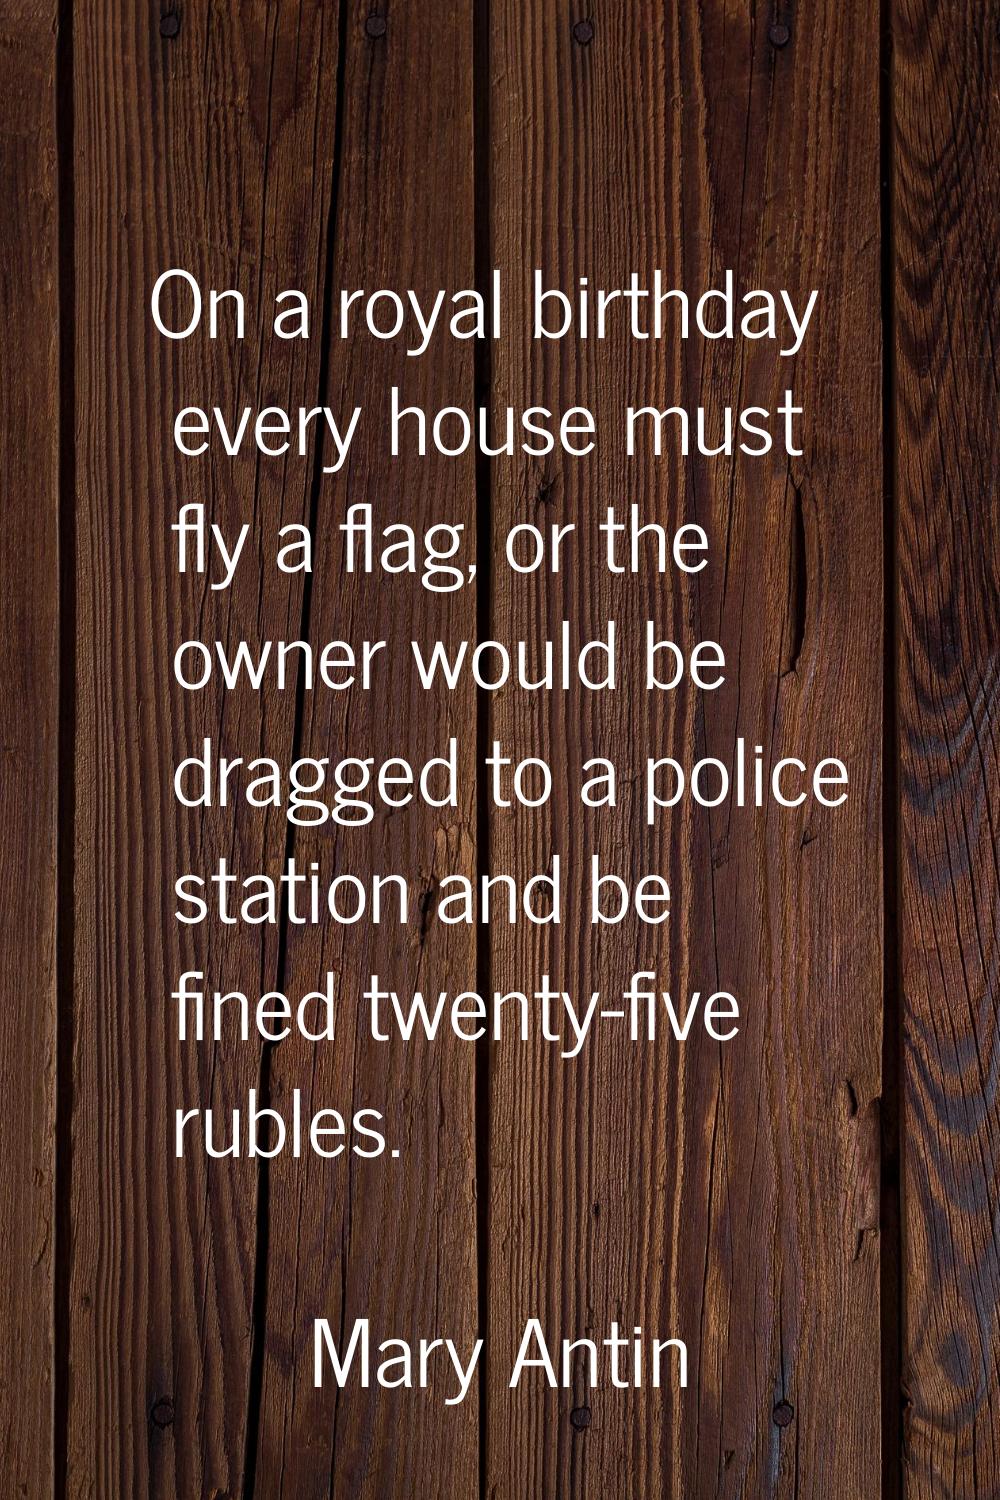 On a royal birthday every house must fly a flag, or the owner would be dragged to a police station 